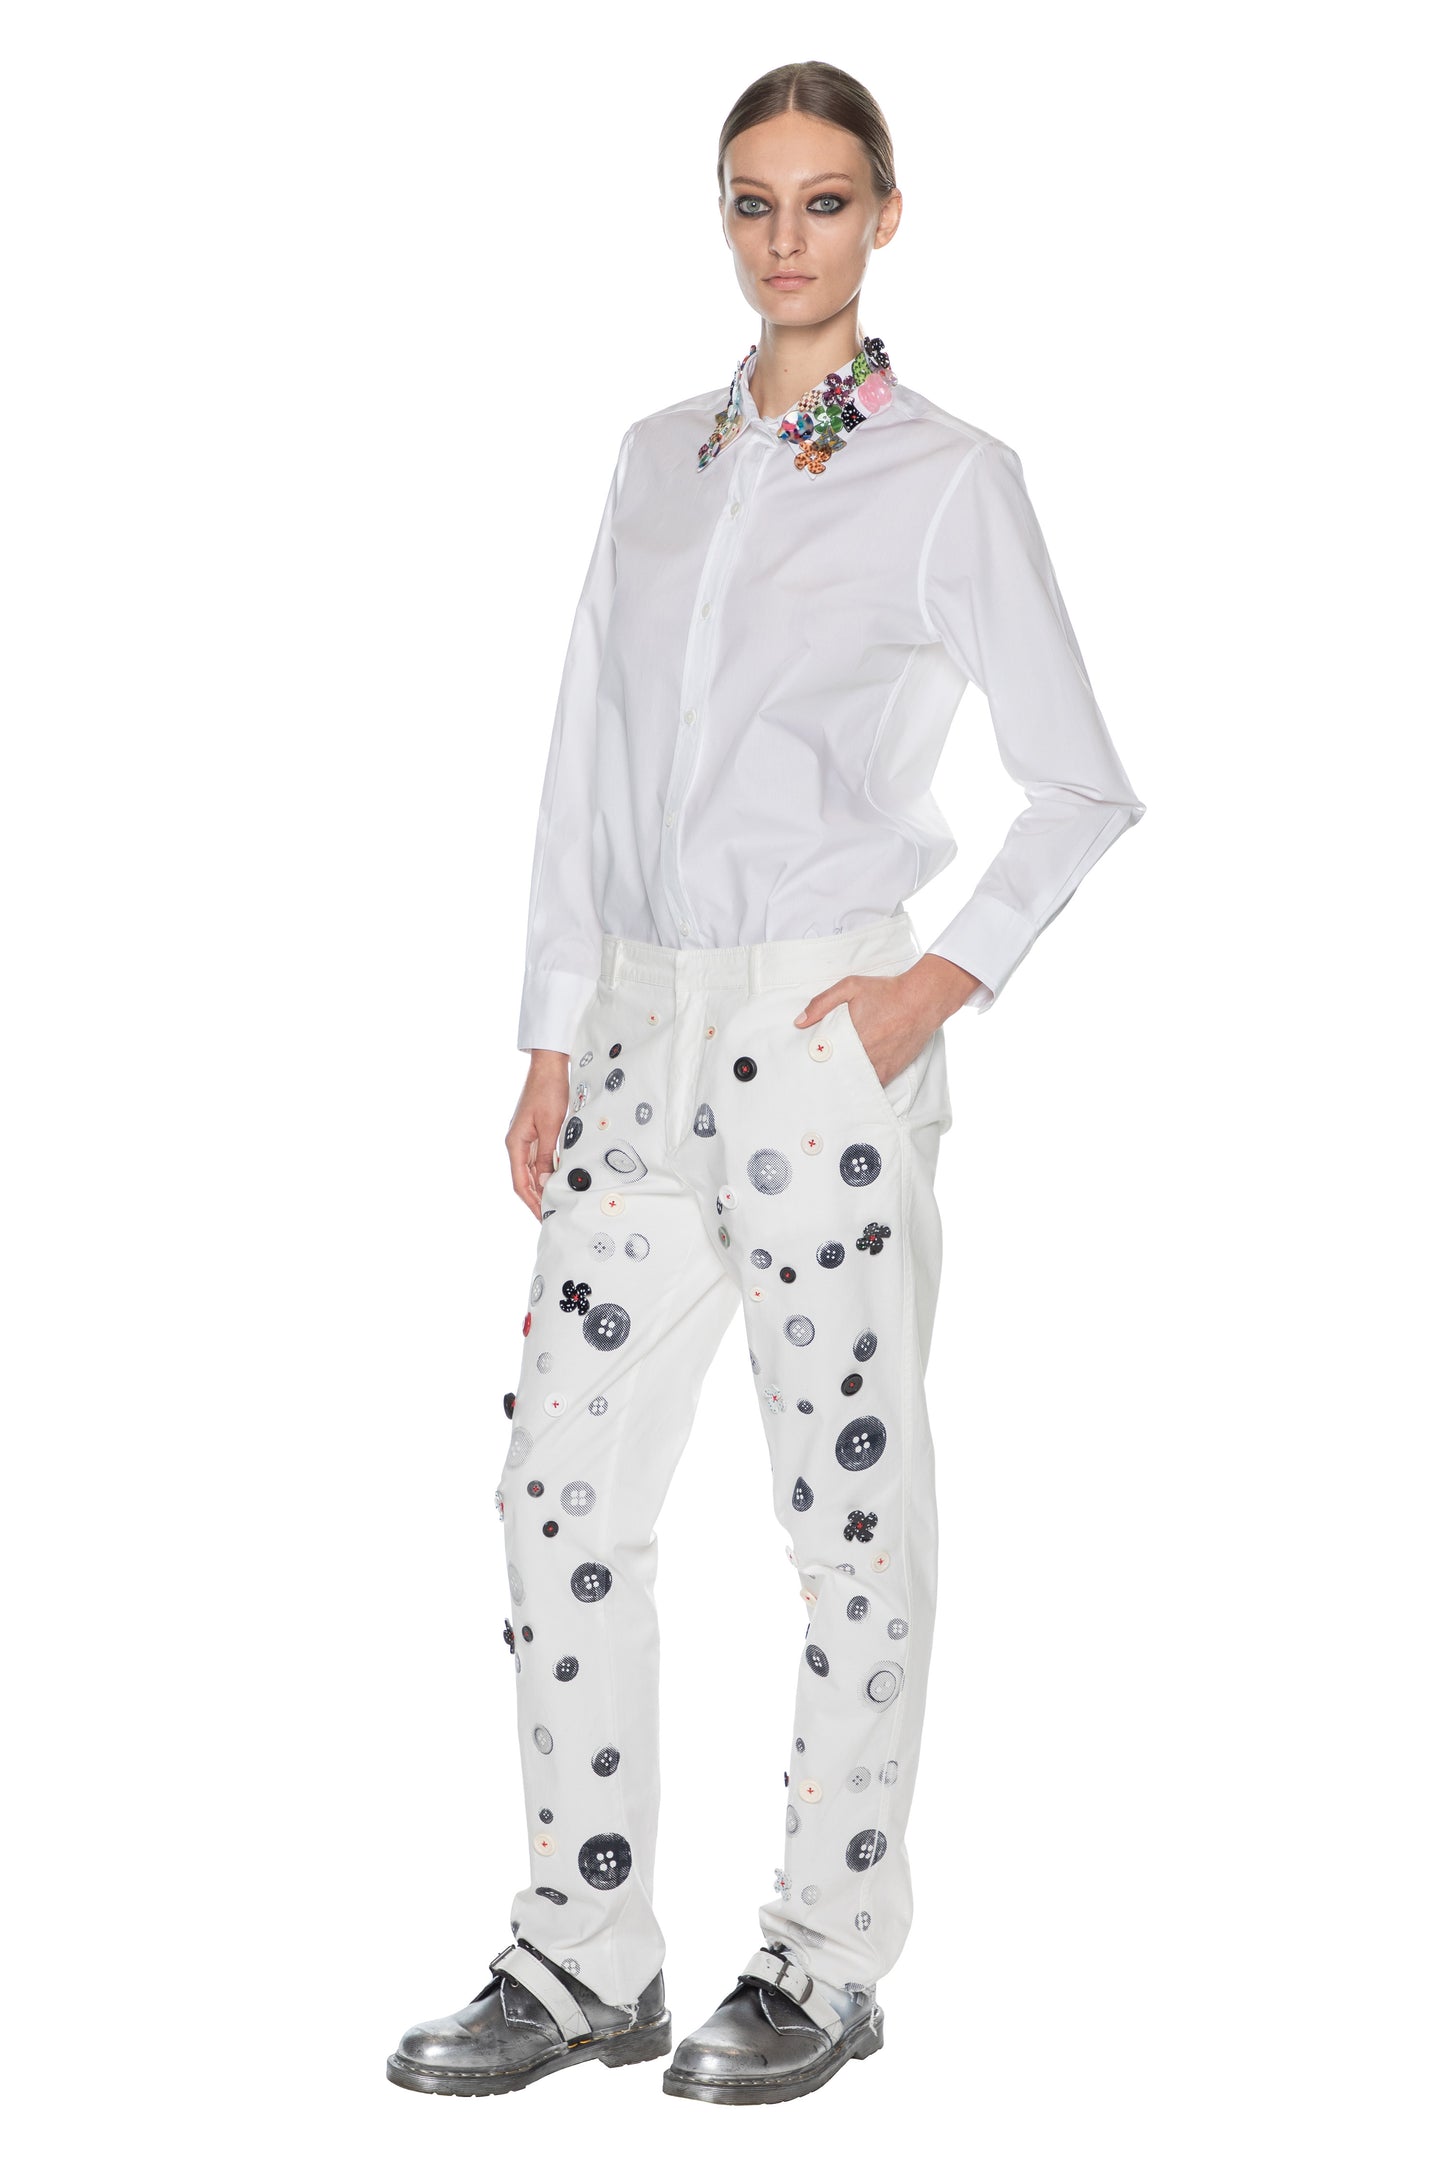 'EXISTENTIAL BUTTONS' WOMEN'S CHINOS -  - Libertine